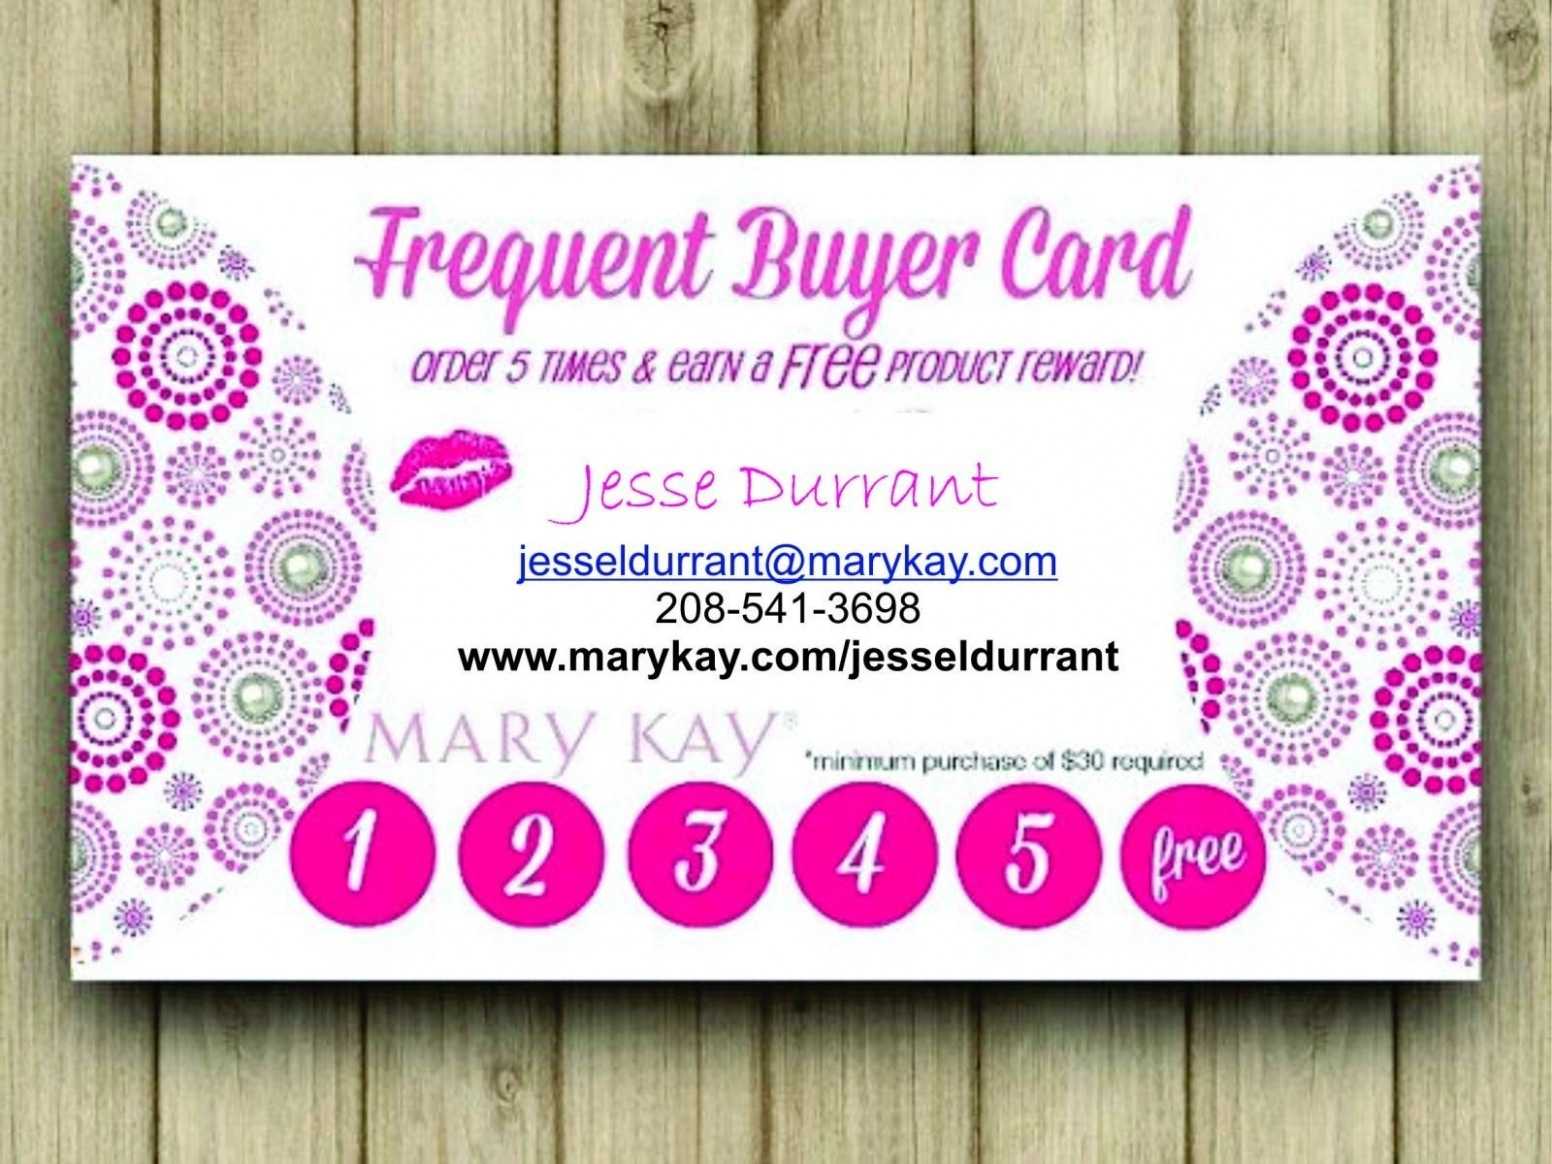 Frequent Buyer Card Template Free – Calep.midnightpig.co With Mary Kay Business Cards Templates Free